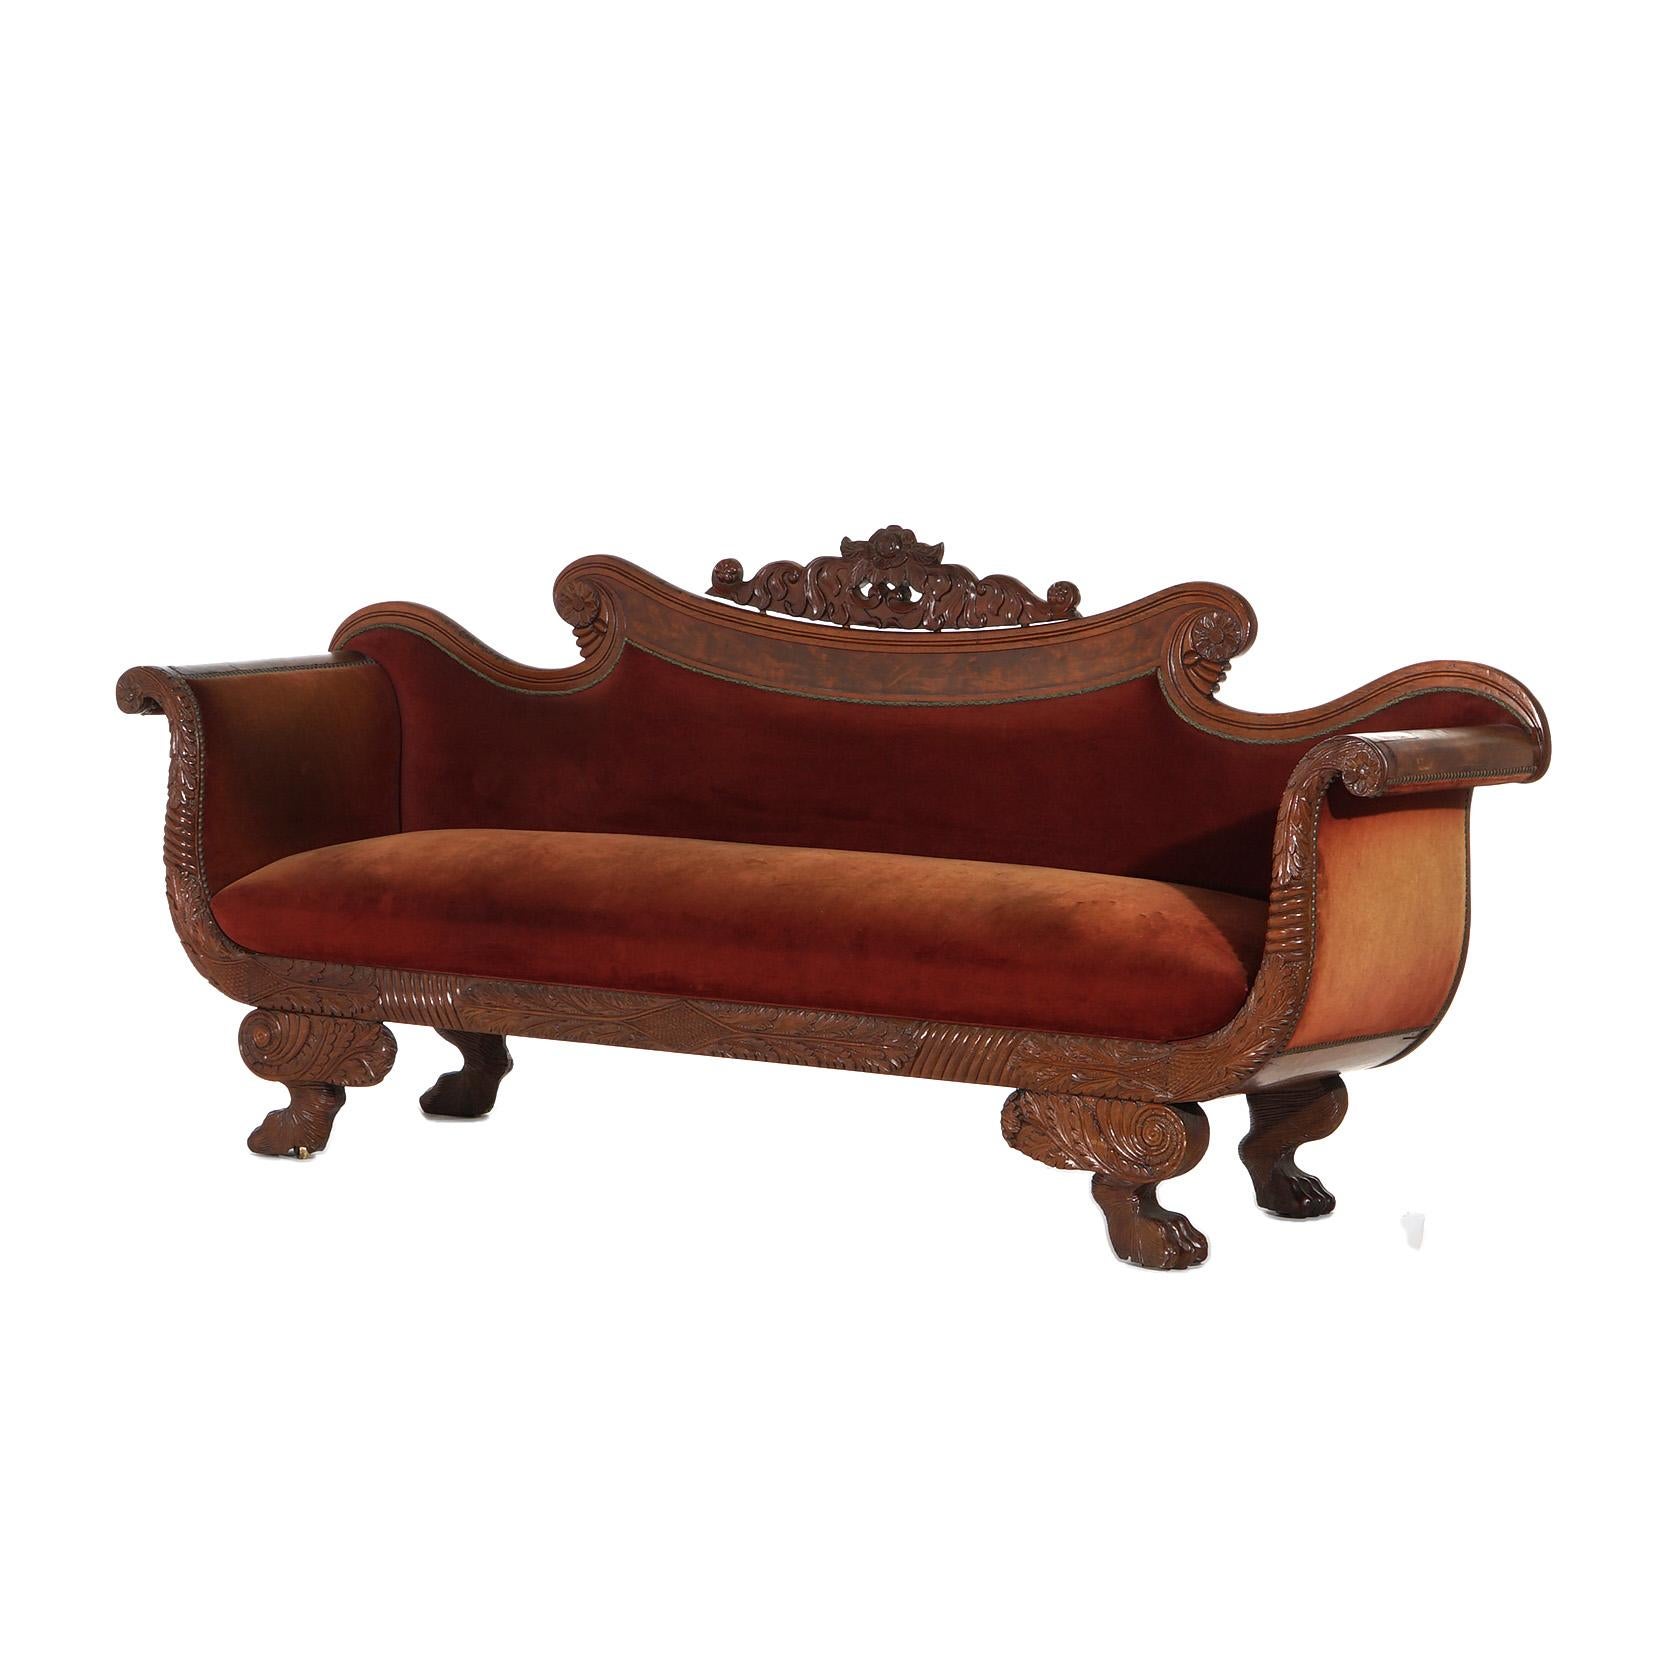 Antique Neoclassical American Empire Carved Walnut And Burl Sofa C1840 In Good Condition For Sale In Big Flats, NY